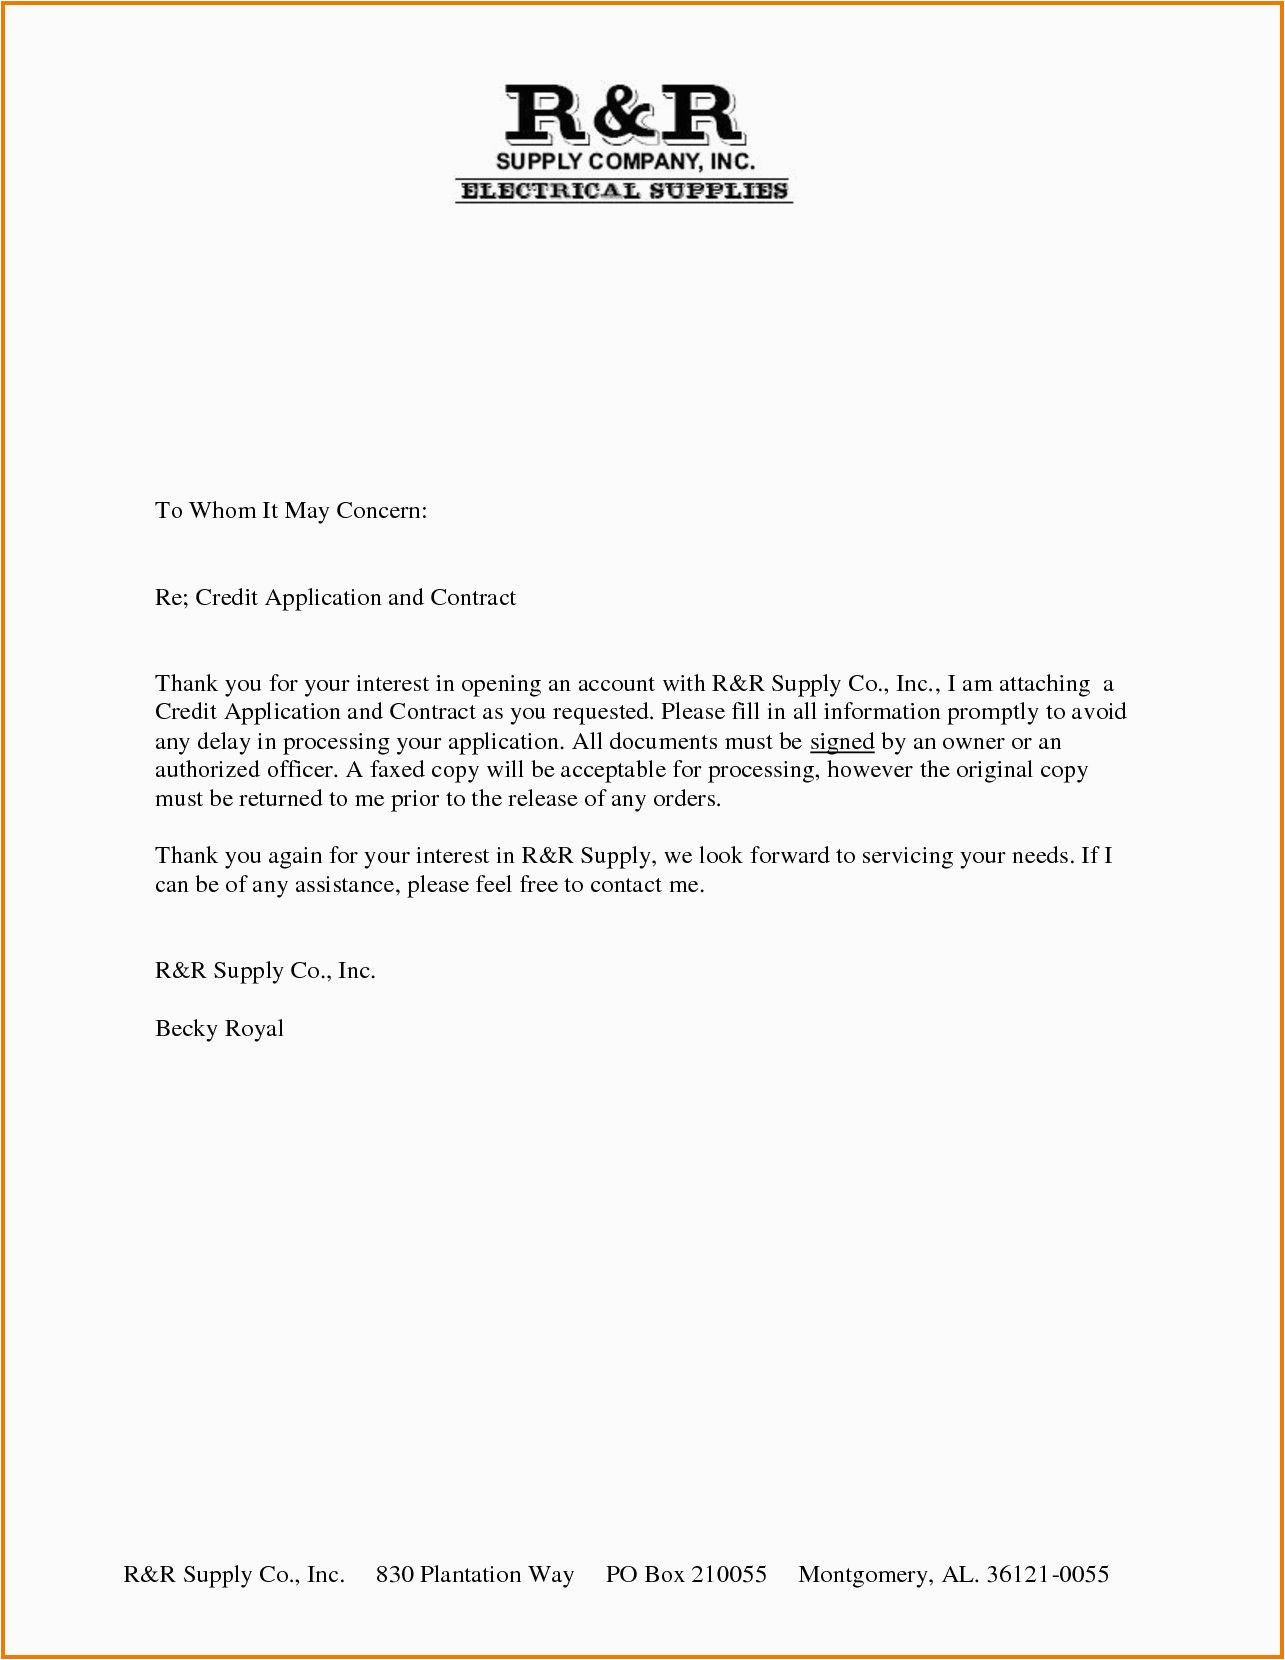 Resume Cover Letter to whom May It Concern Sample 26 Cover Letter to whom It May Concern